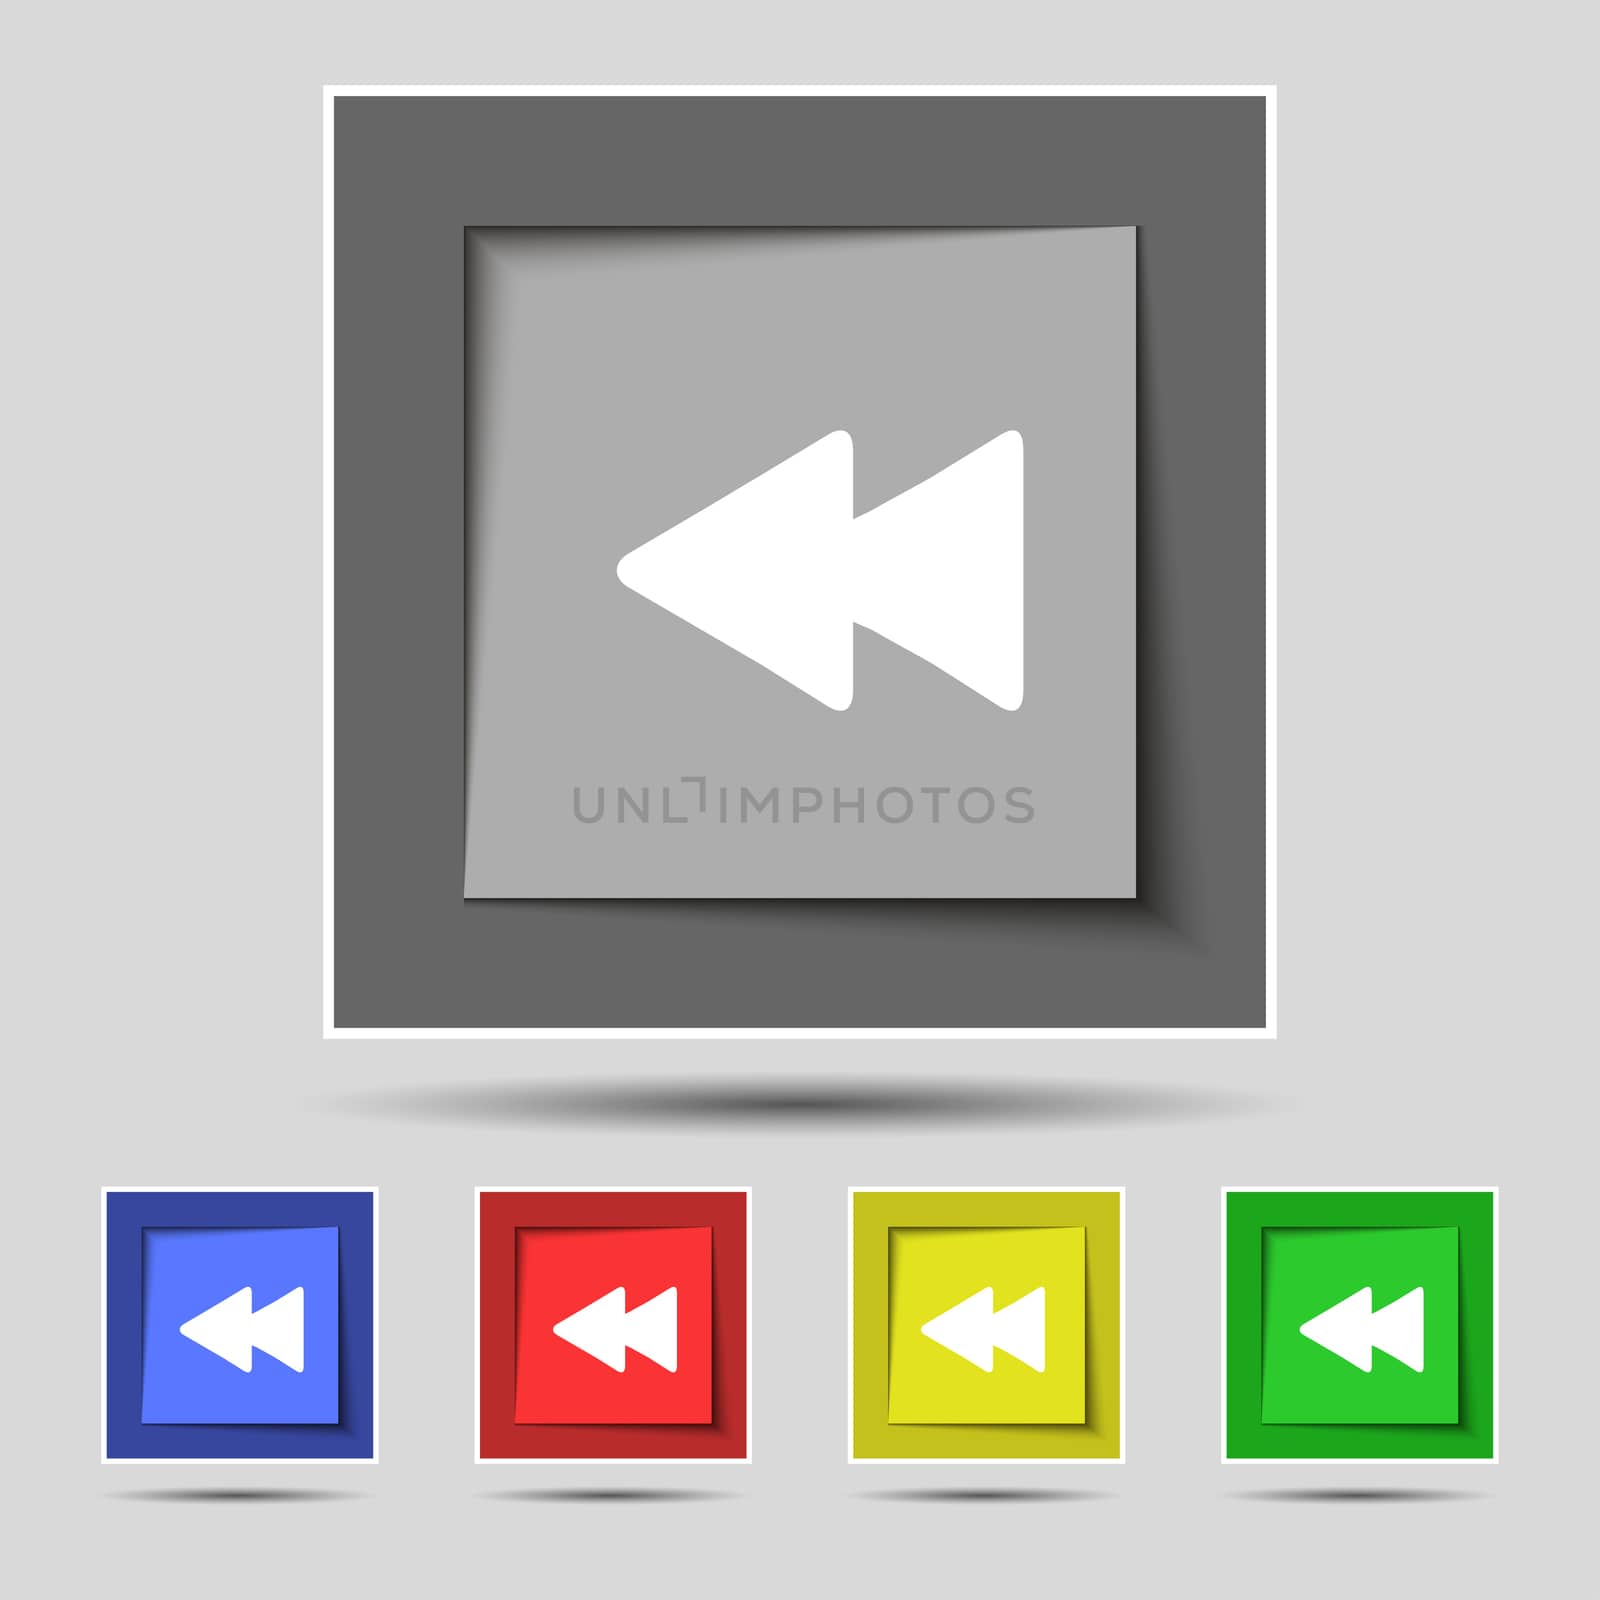 rewind icon sign on the original five colored buttons. illustration